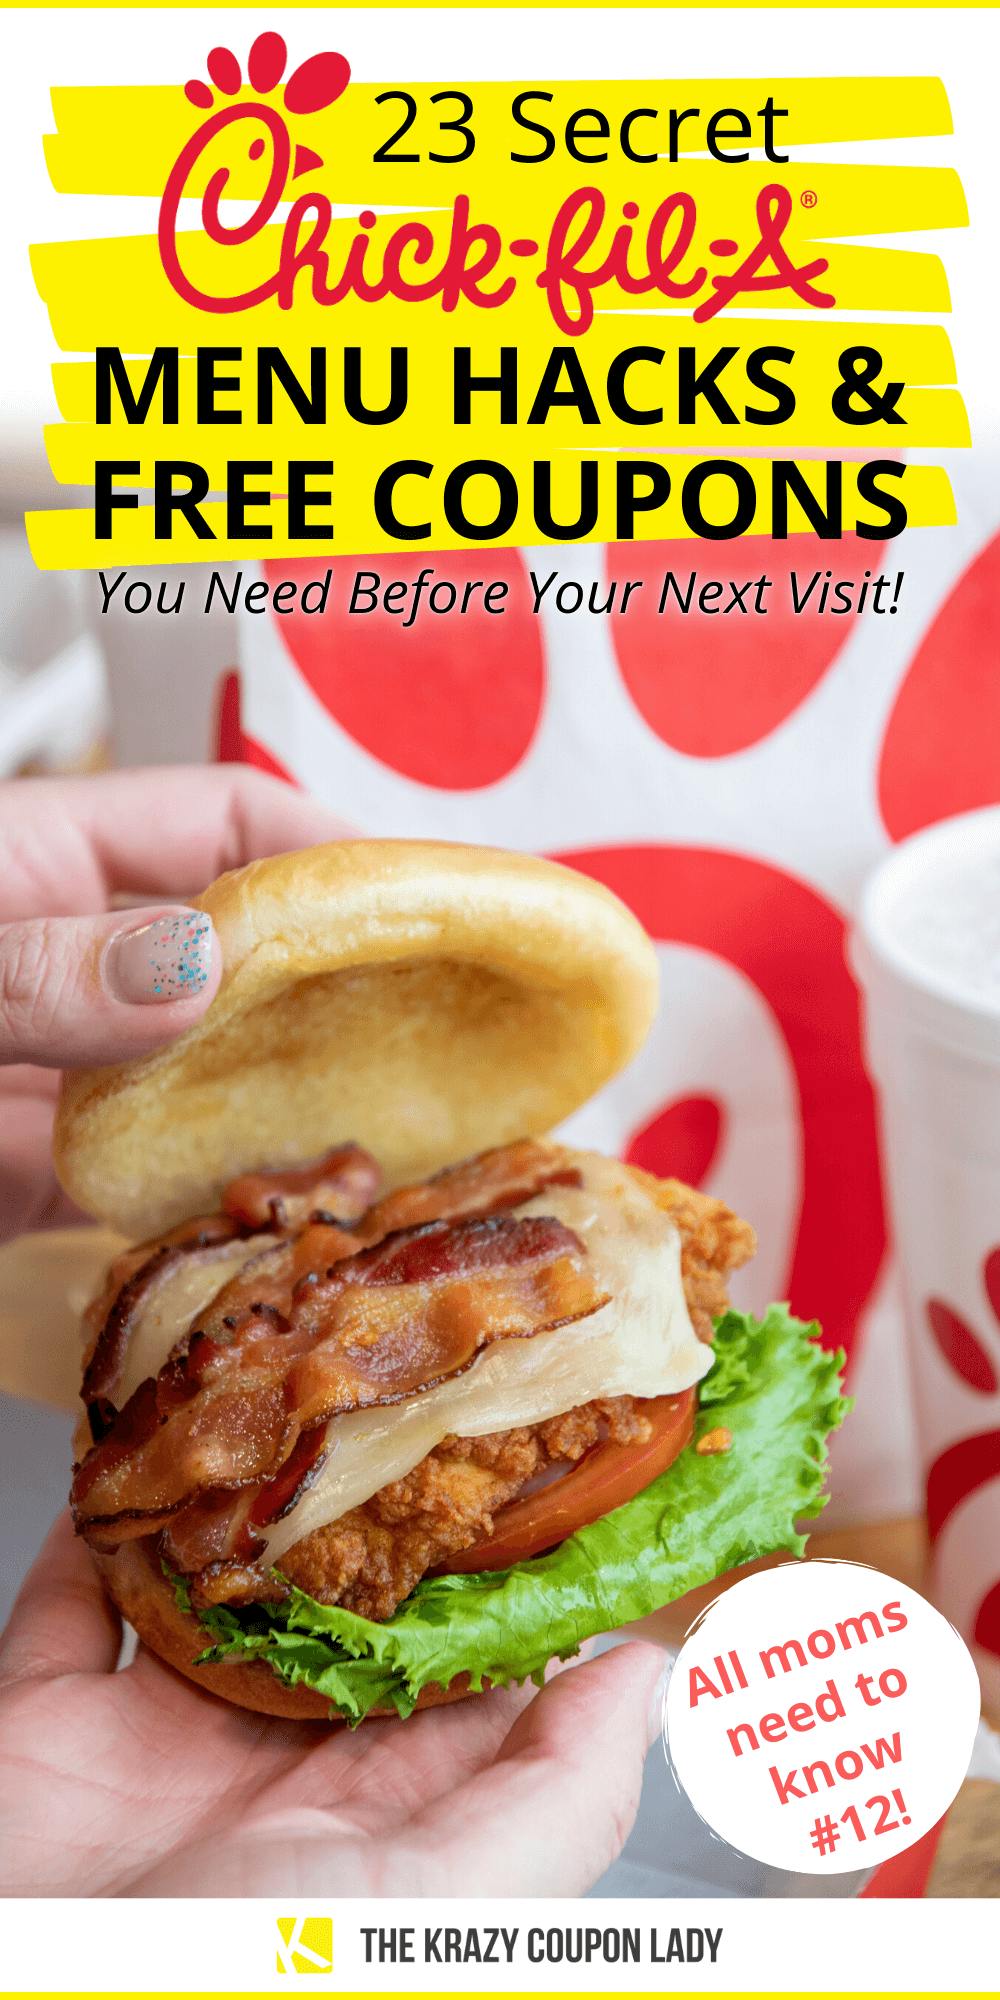 23 Chick Fil A Free Coupons And Secret Menu Hacks For Mor Chickin The Krazy Coupon Lady